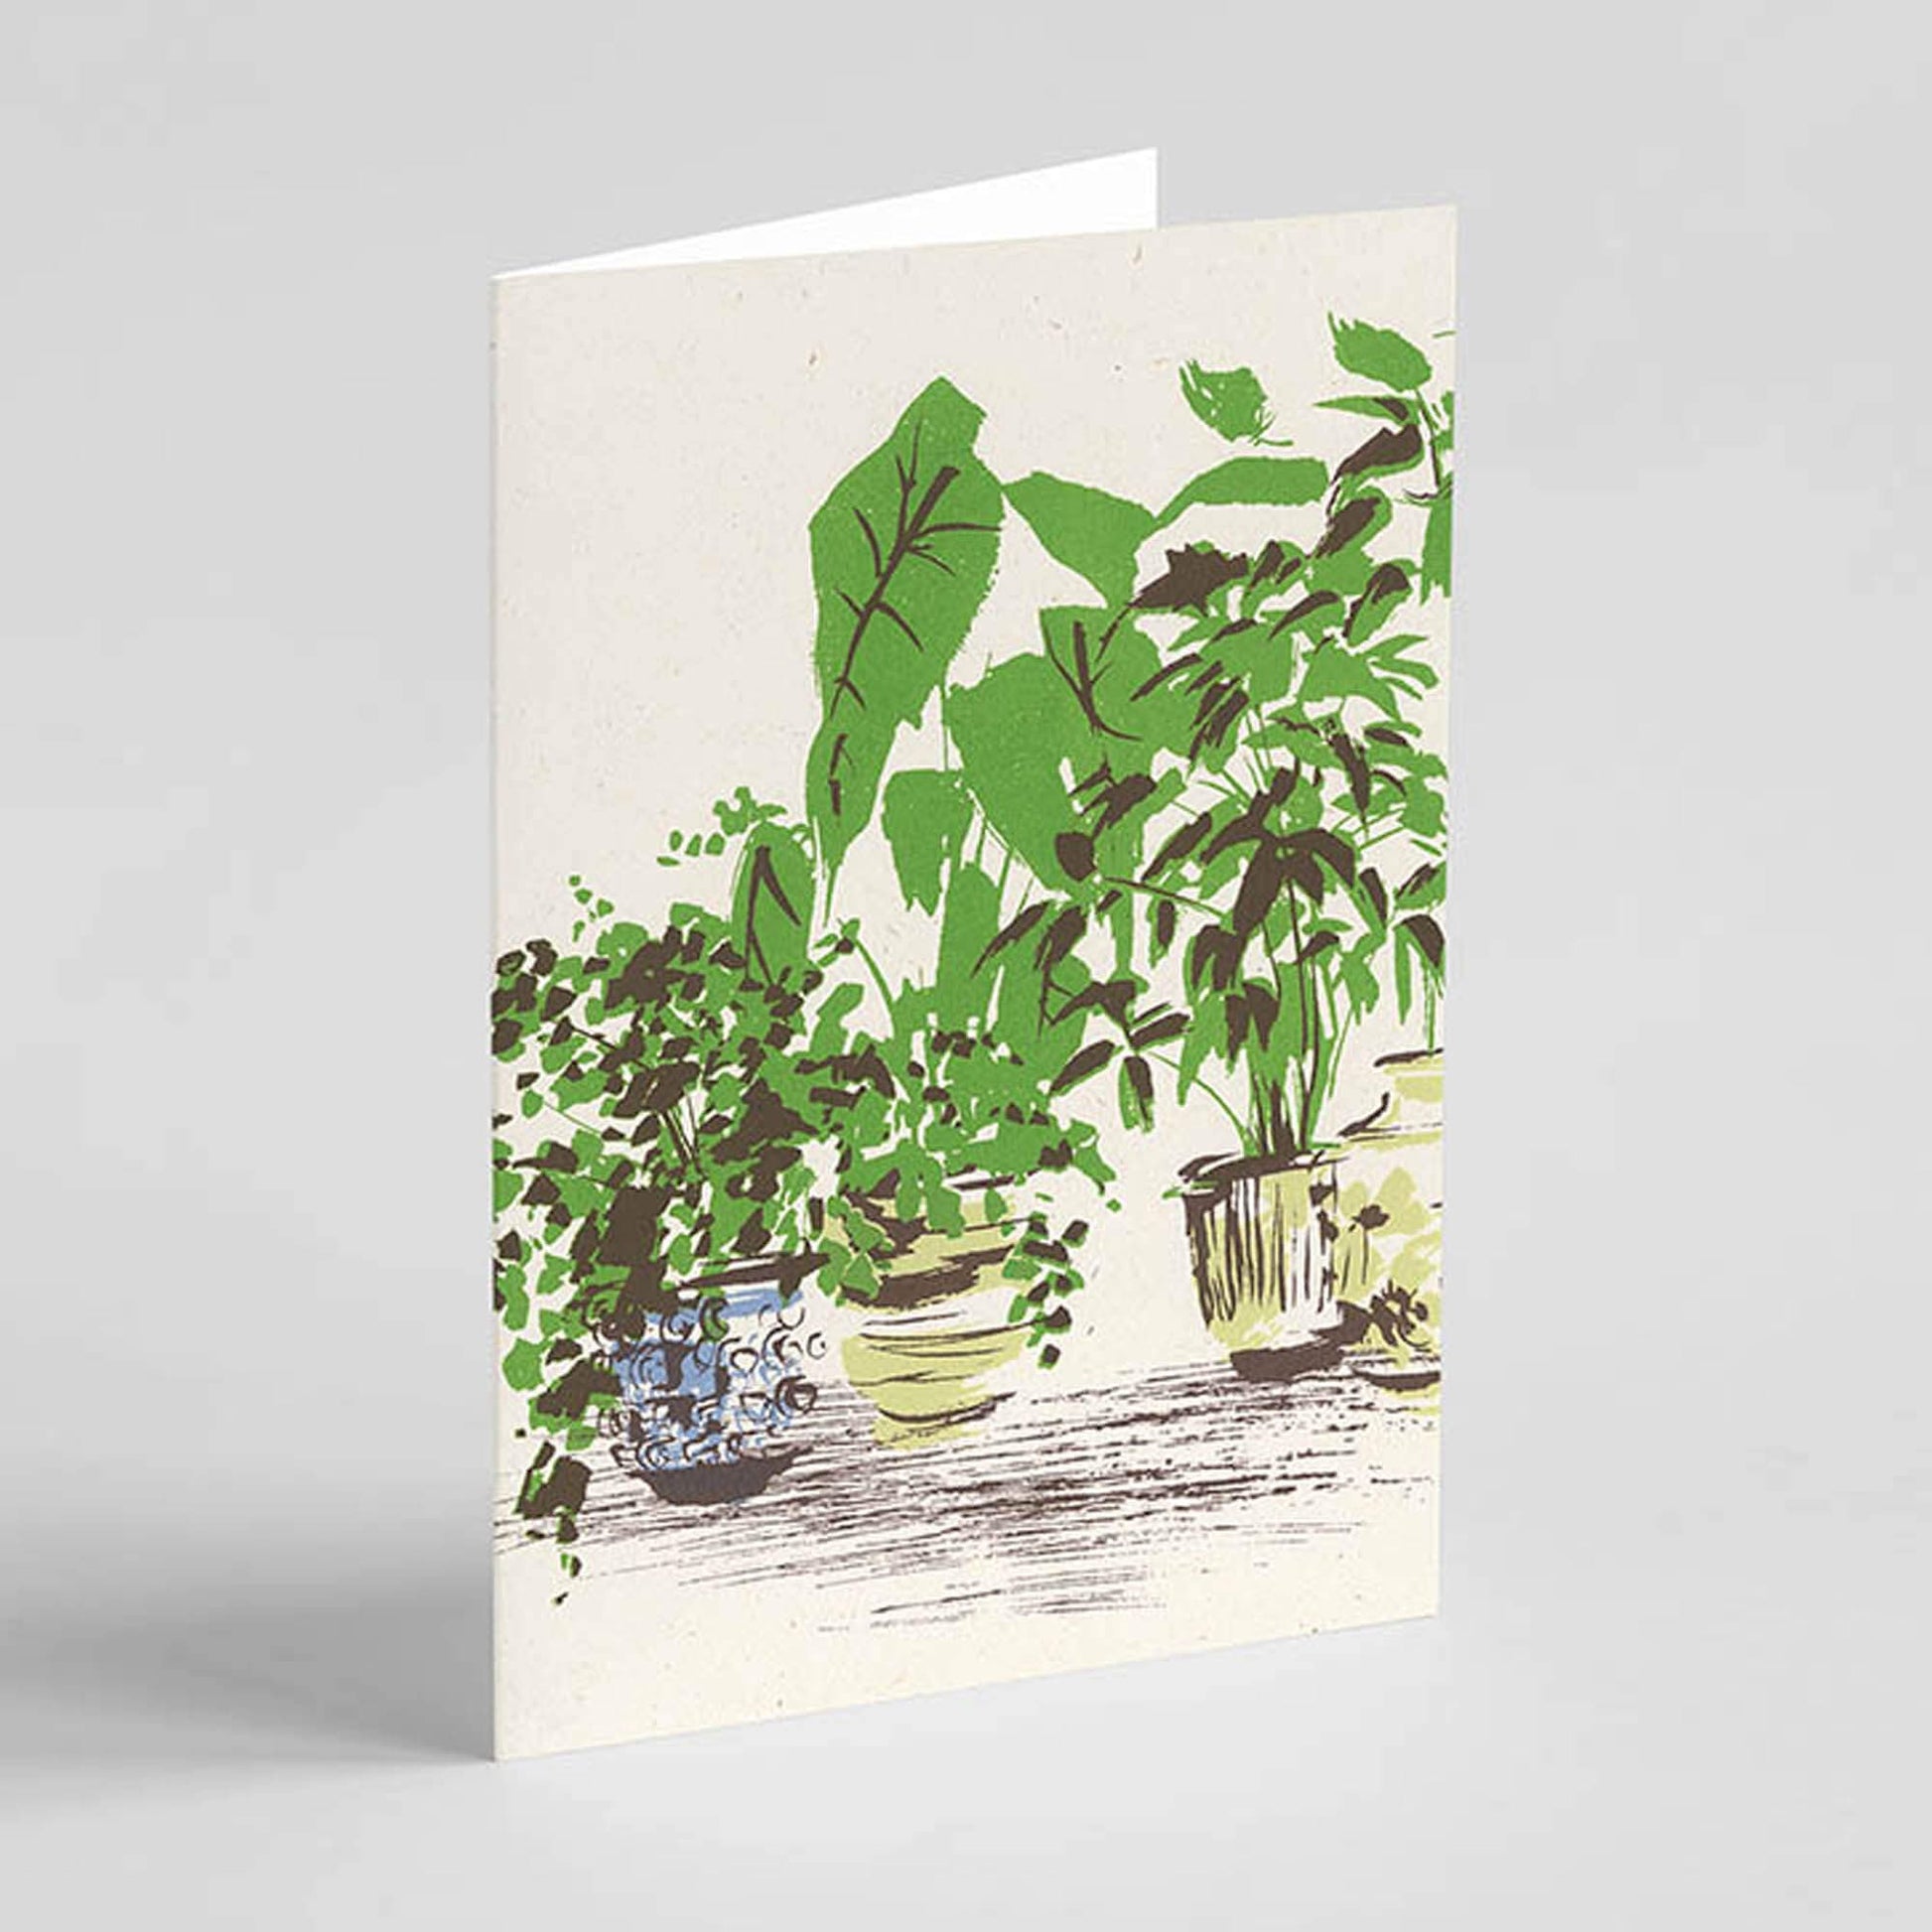 Ben Rogers Prints Greetings Card Pots and Plants - Greetings Card